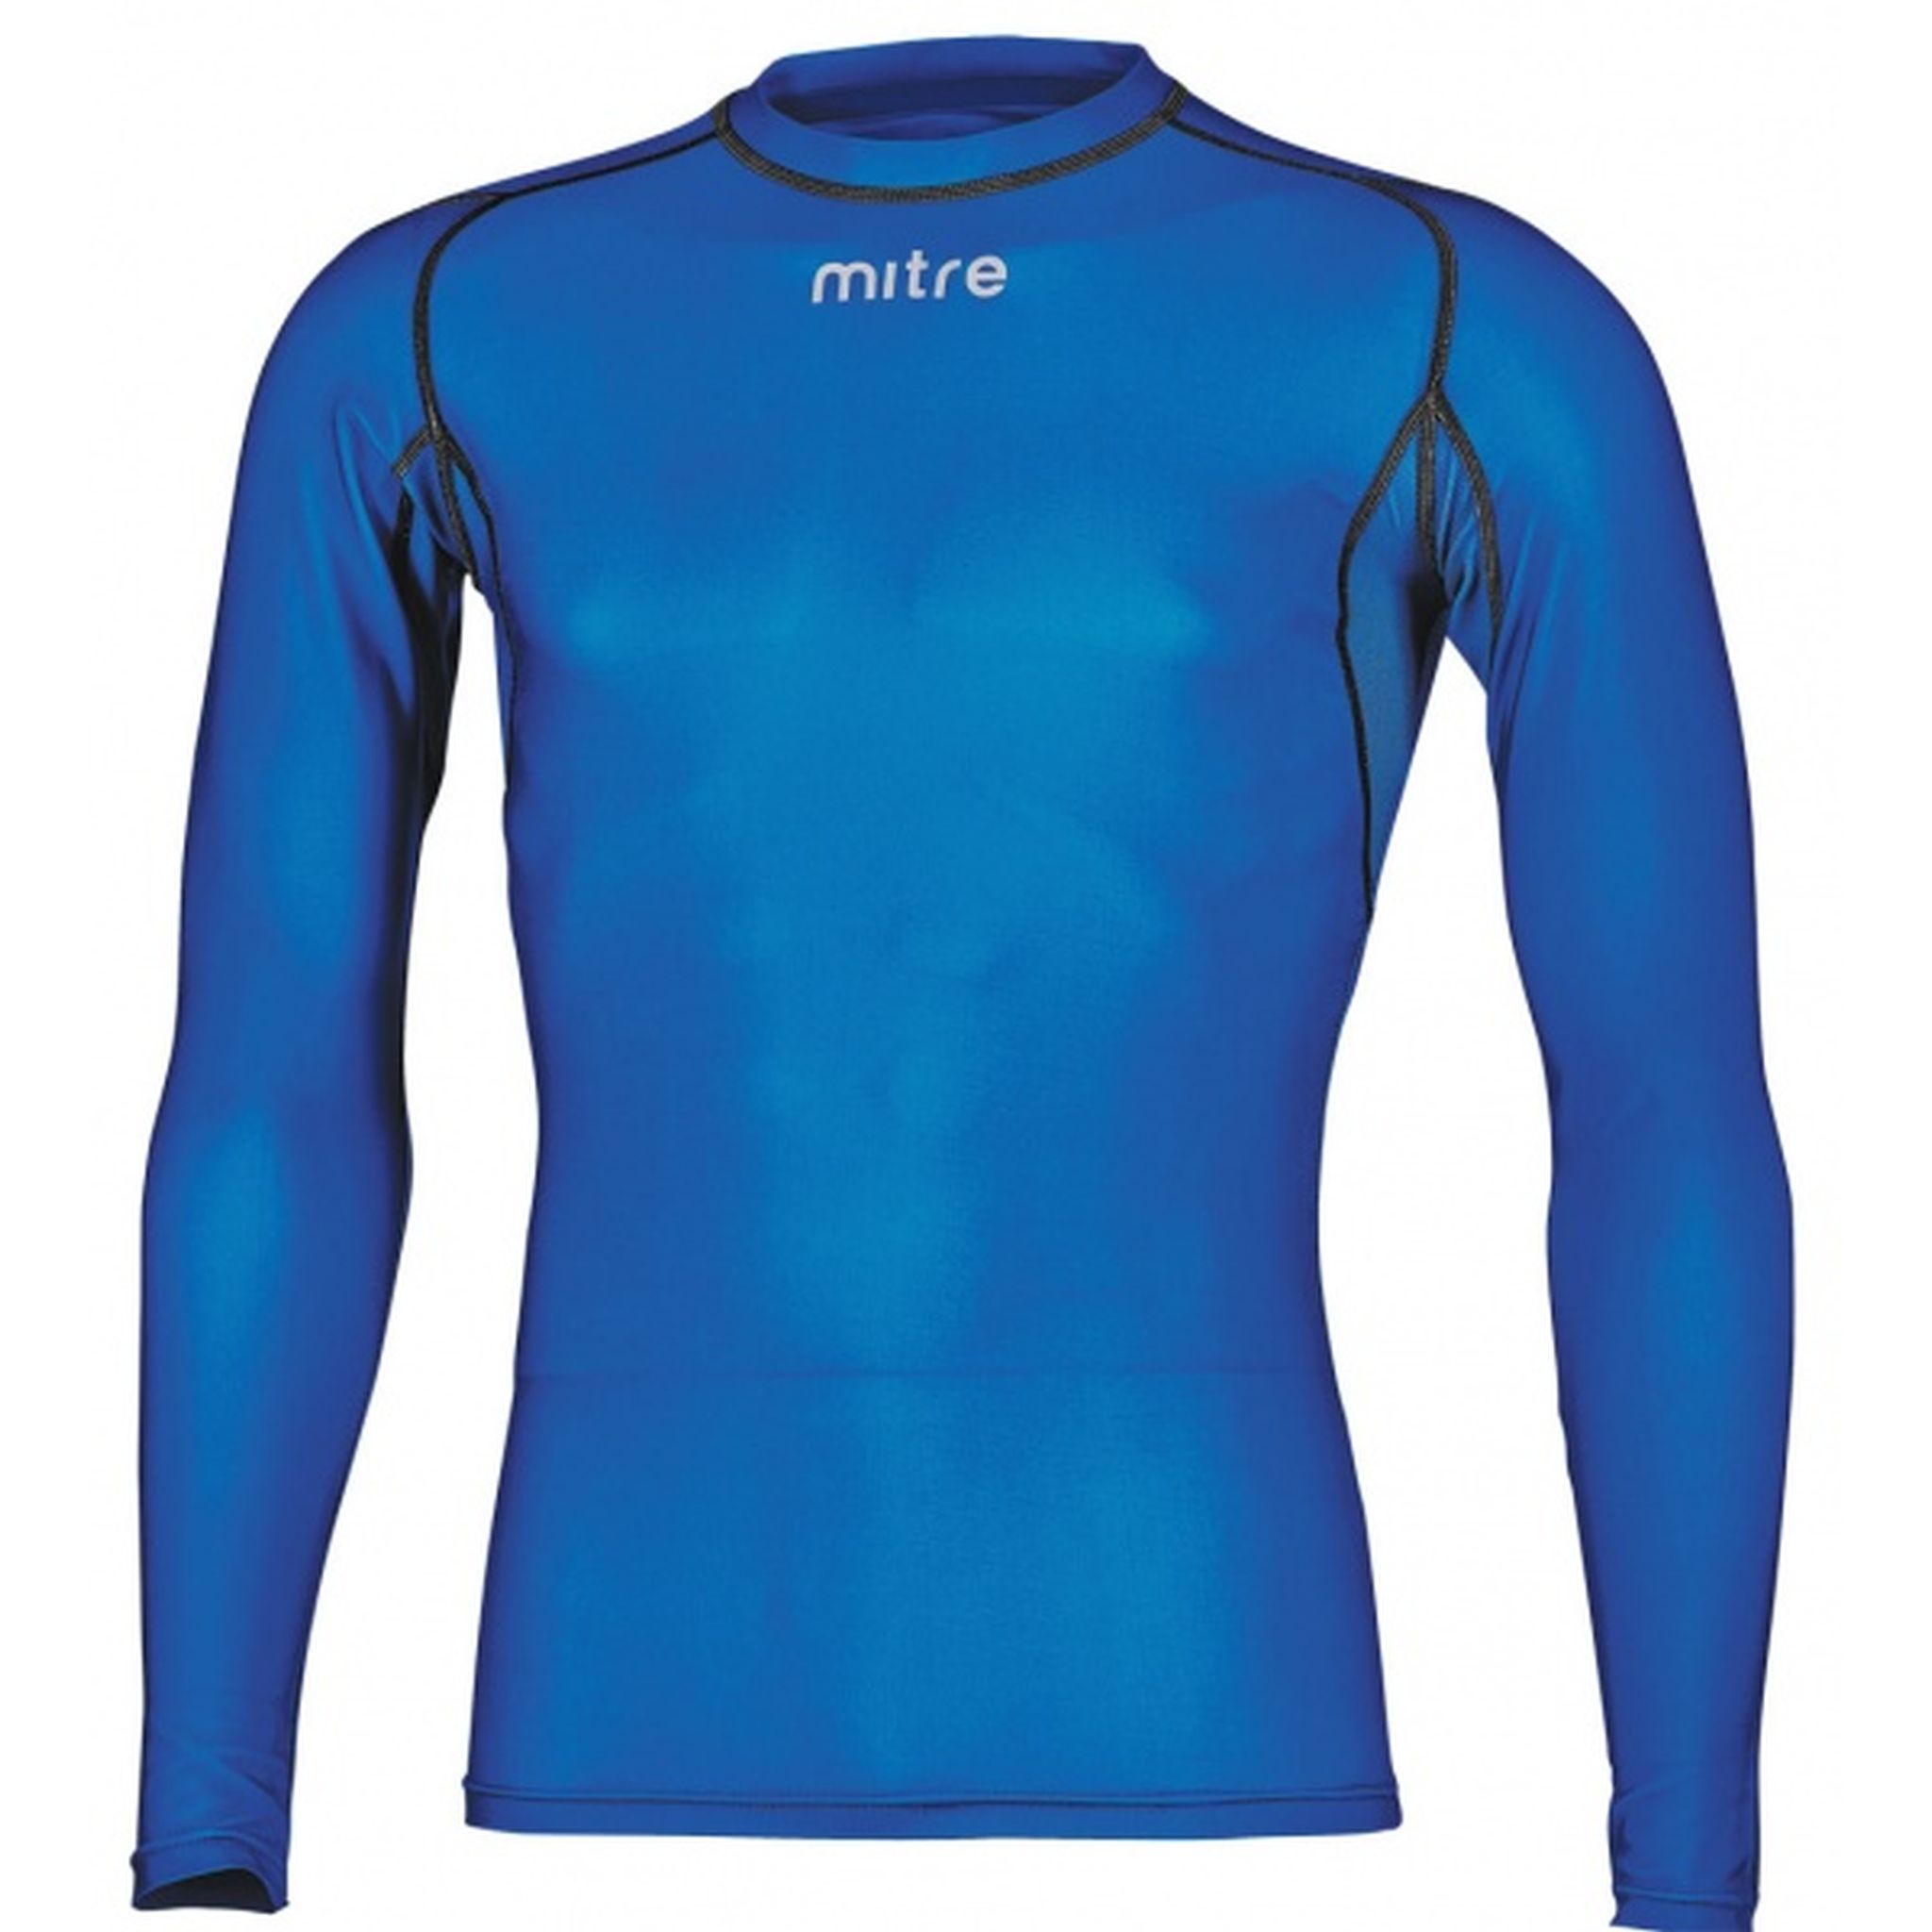 Mitre Youth Neutron Compression Long Sleeve Top